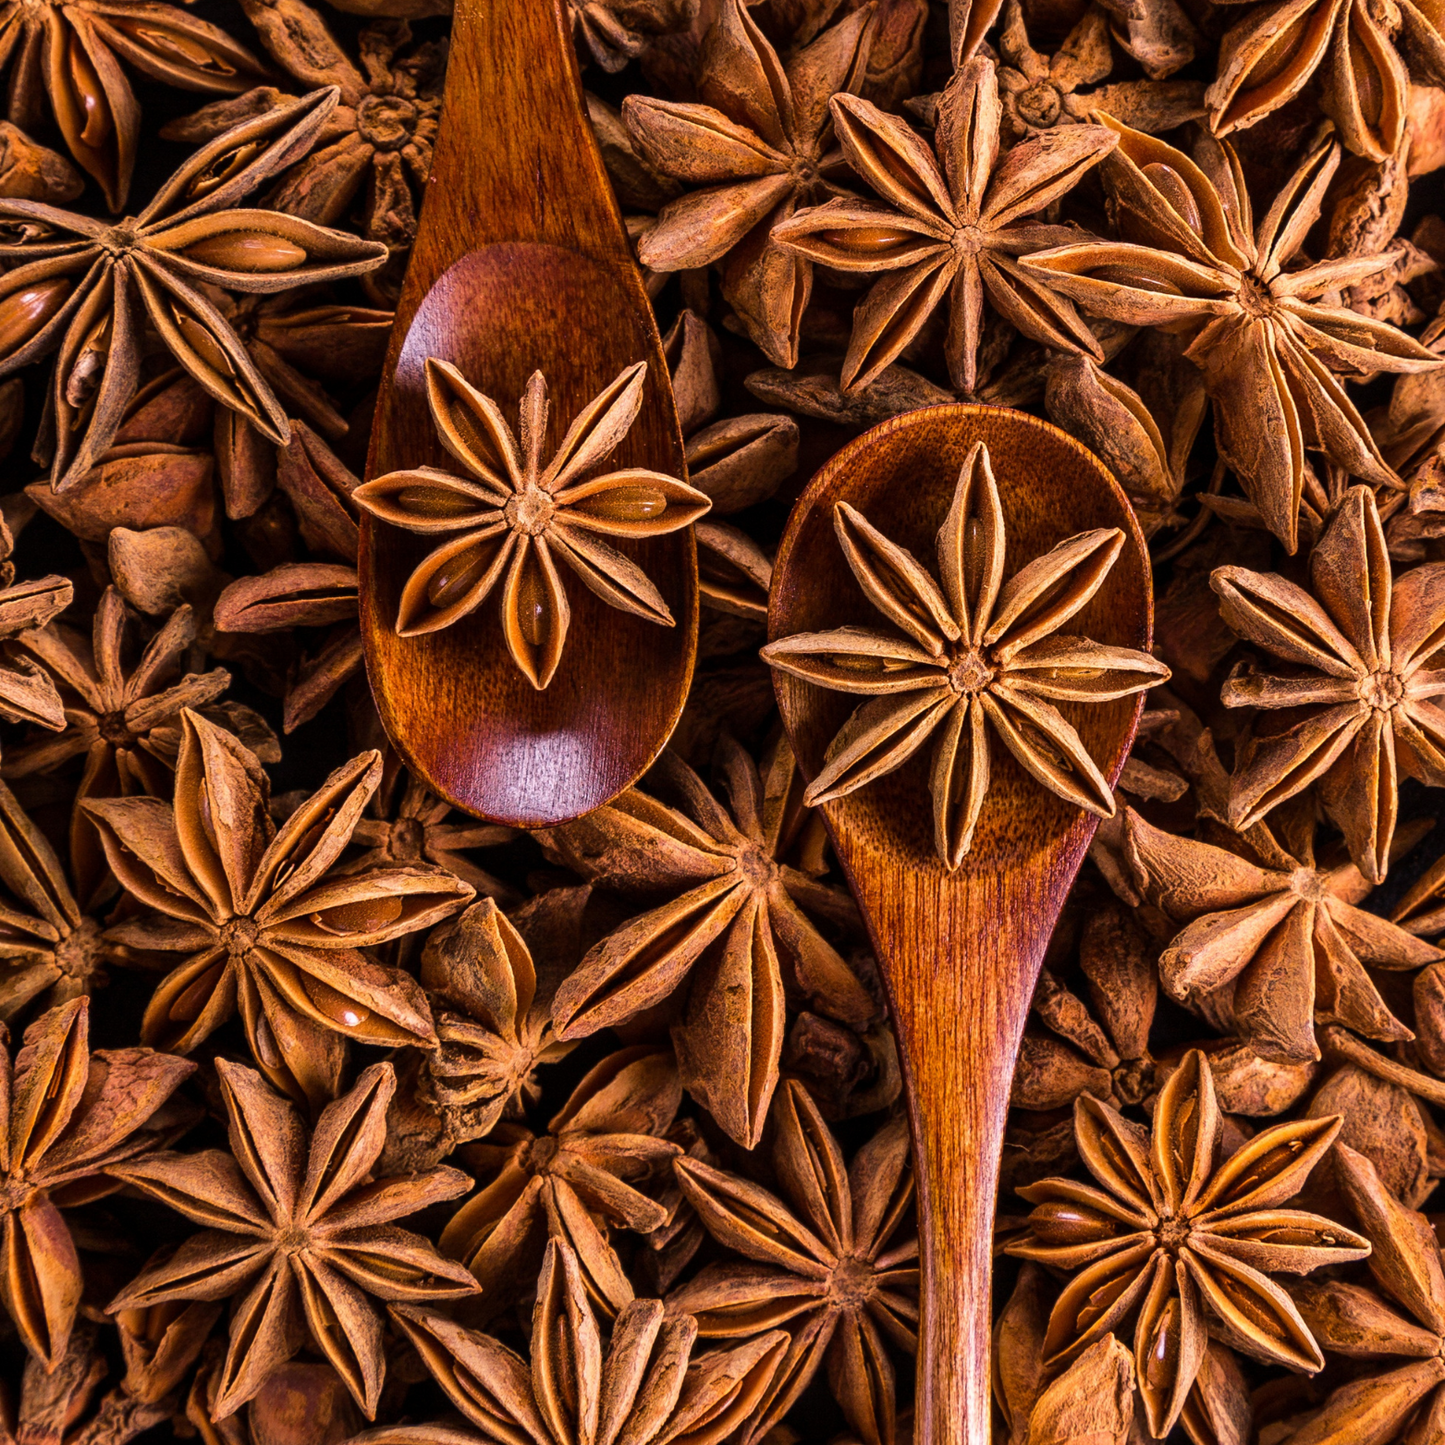 Anise Stars Dried Wole and Pieces of Stars for Simmer Pots, Cooking and Ritual